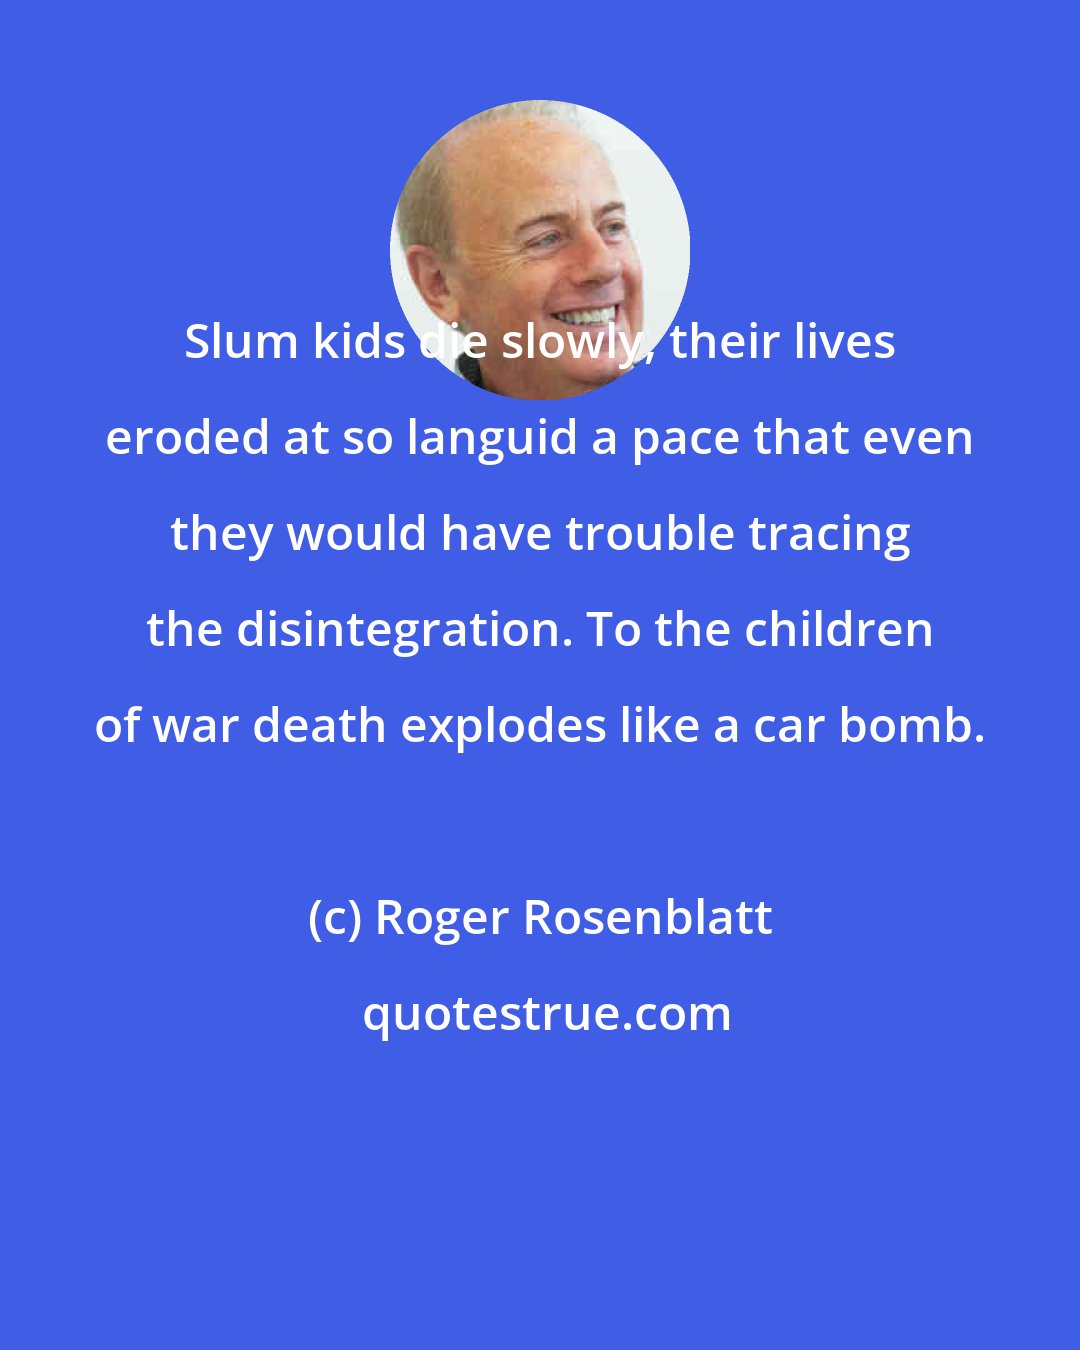 Roger Rosenblatt: Slum kids die slowly, their lives eroded at so languid a pace that even they would have trouble tracing the disintegration. To the children of war death explodes like a car bomb.